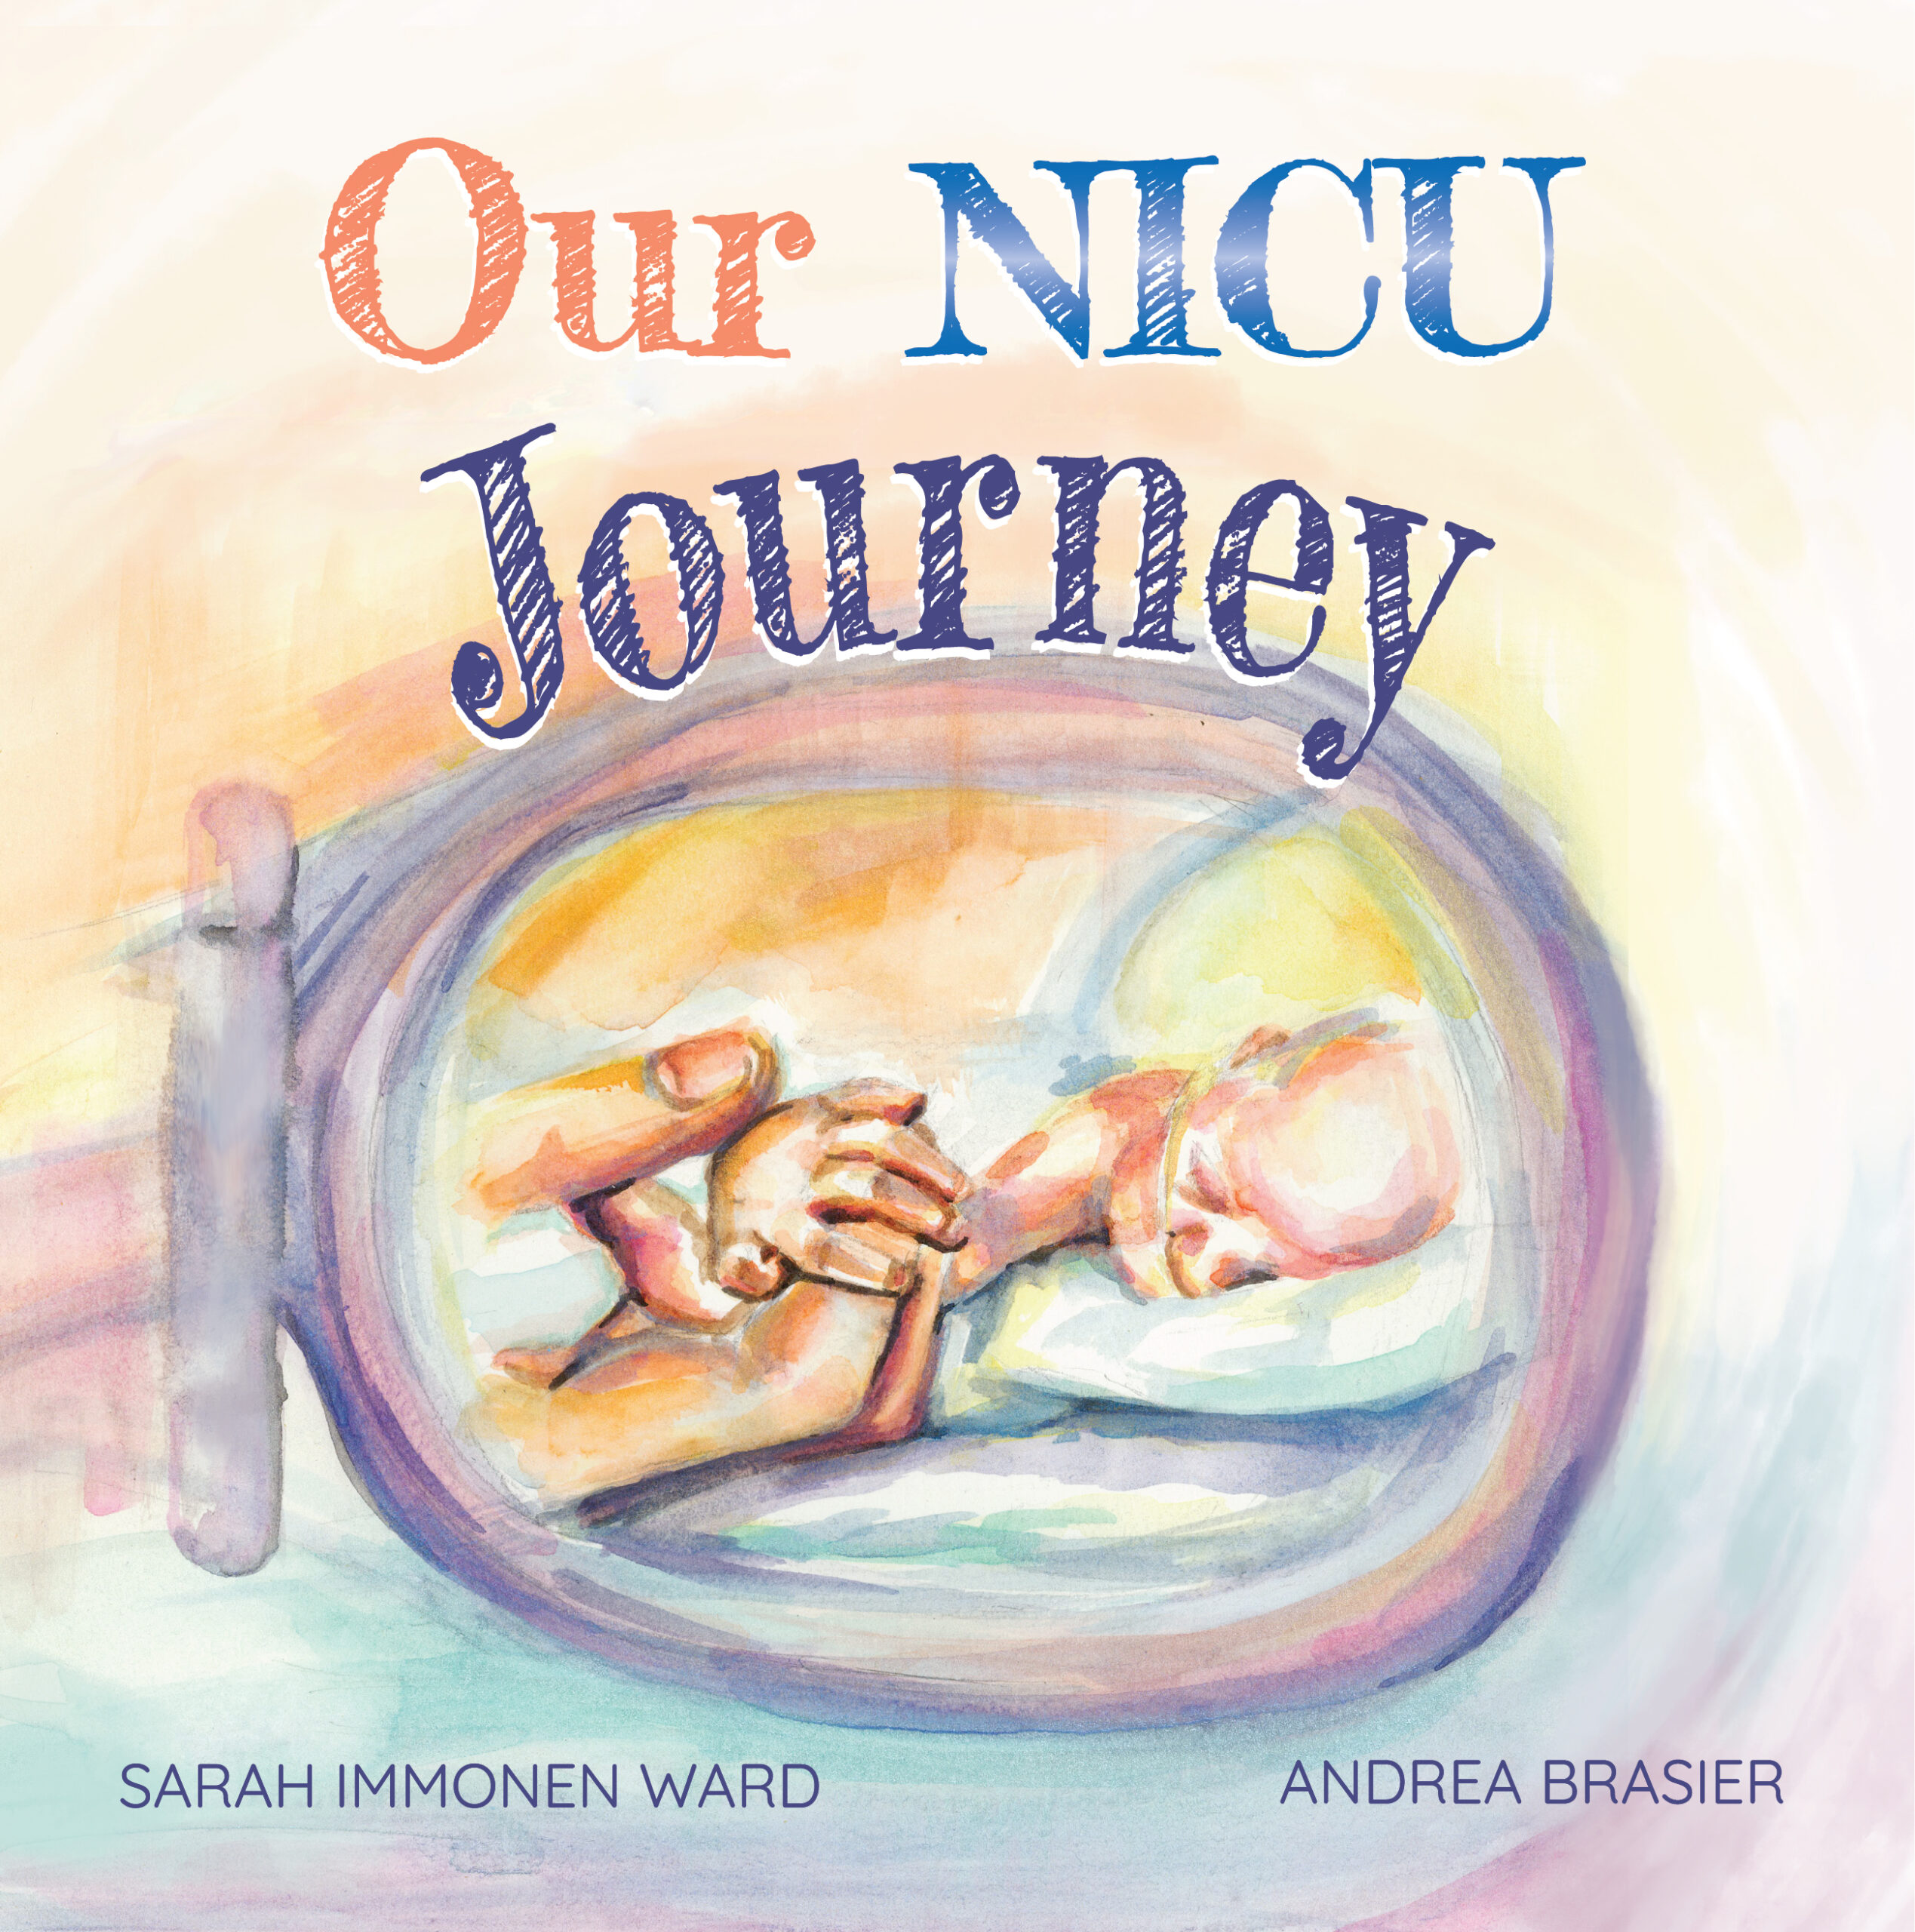 FREE: Our NICU Journey by Sarah Immonen Ward